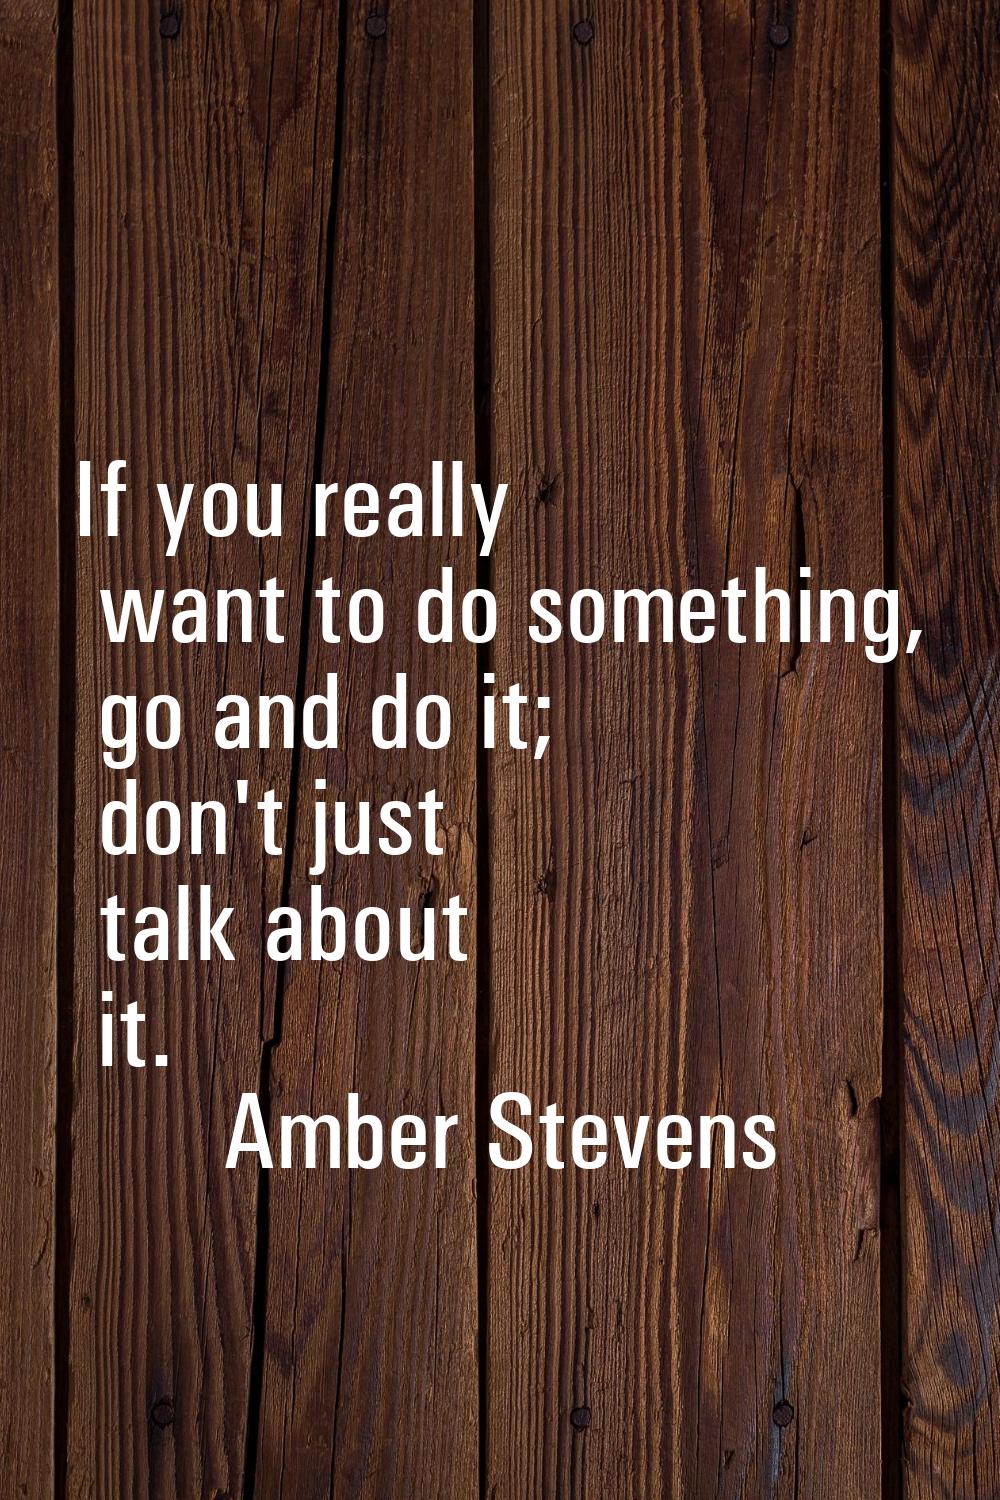 If you really want to do something, go and do it; don't just talk about it.